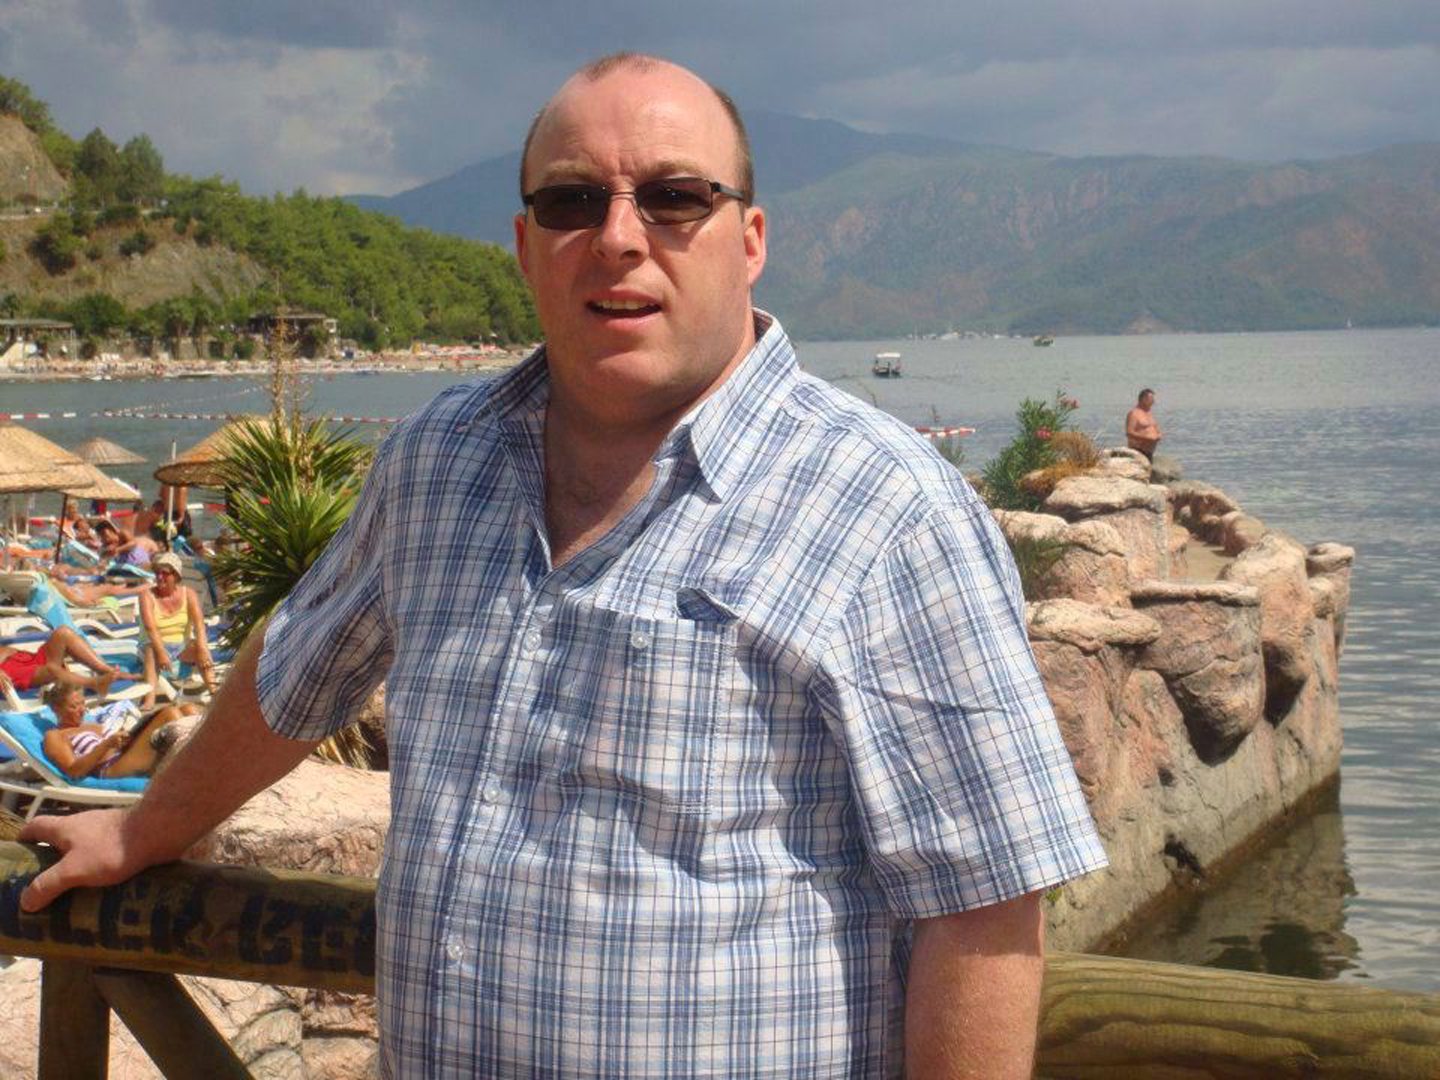 Ian Forbes shown on holiday wearing sunglasses.